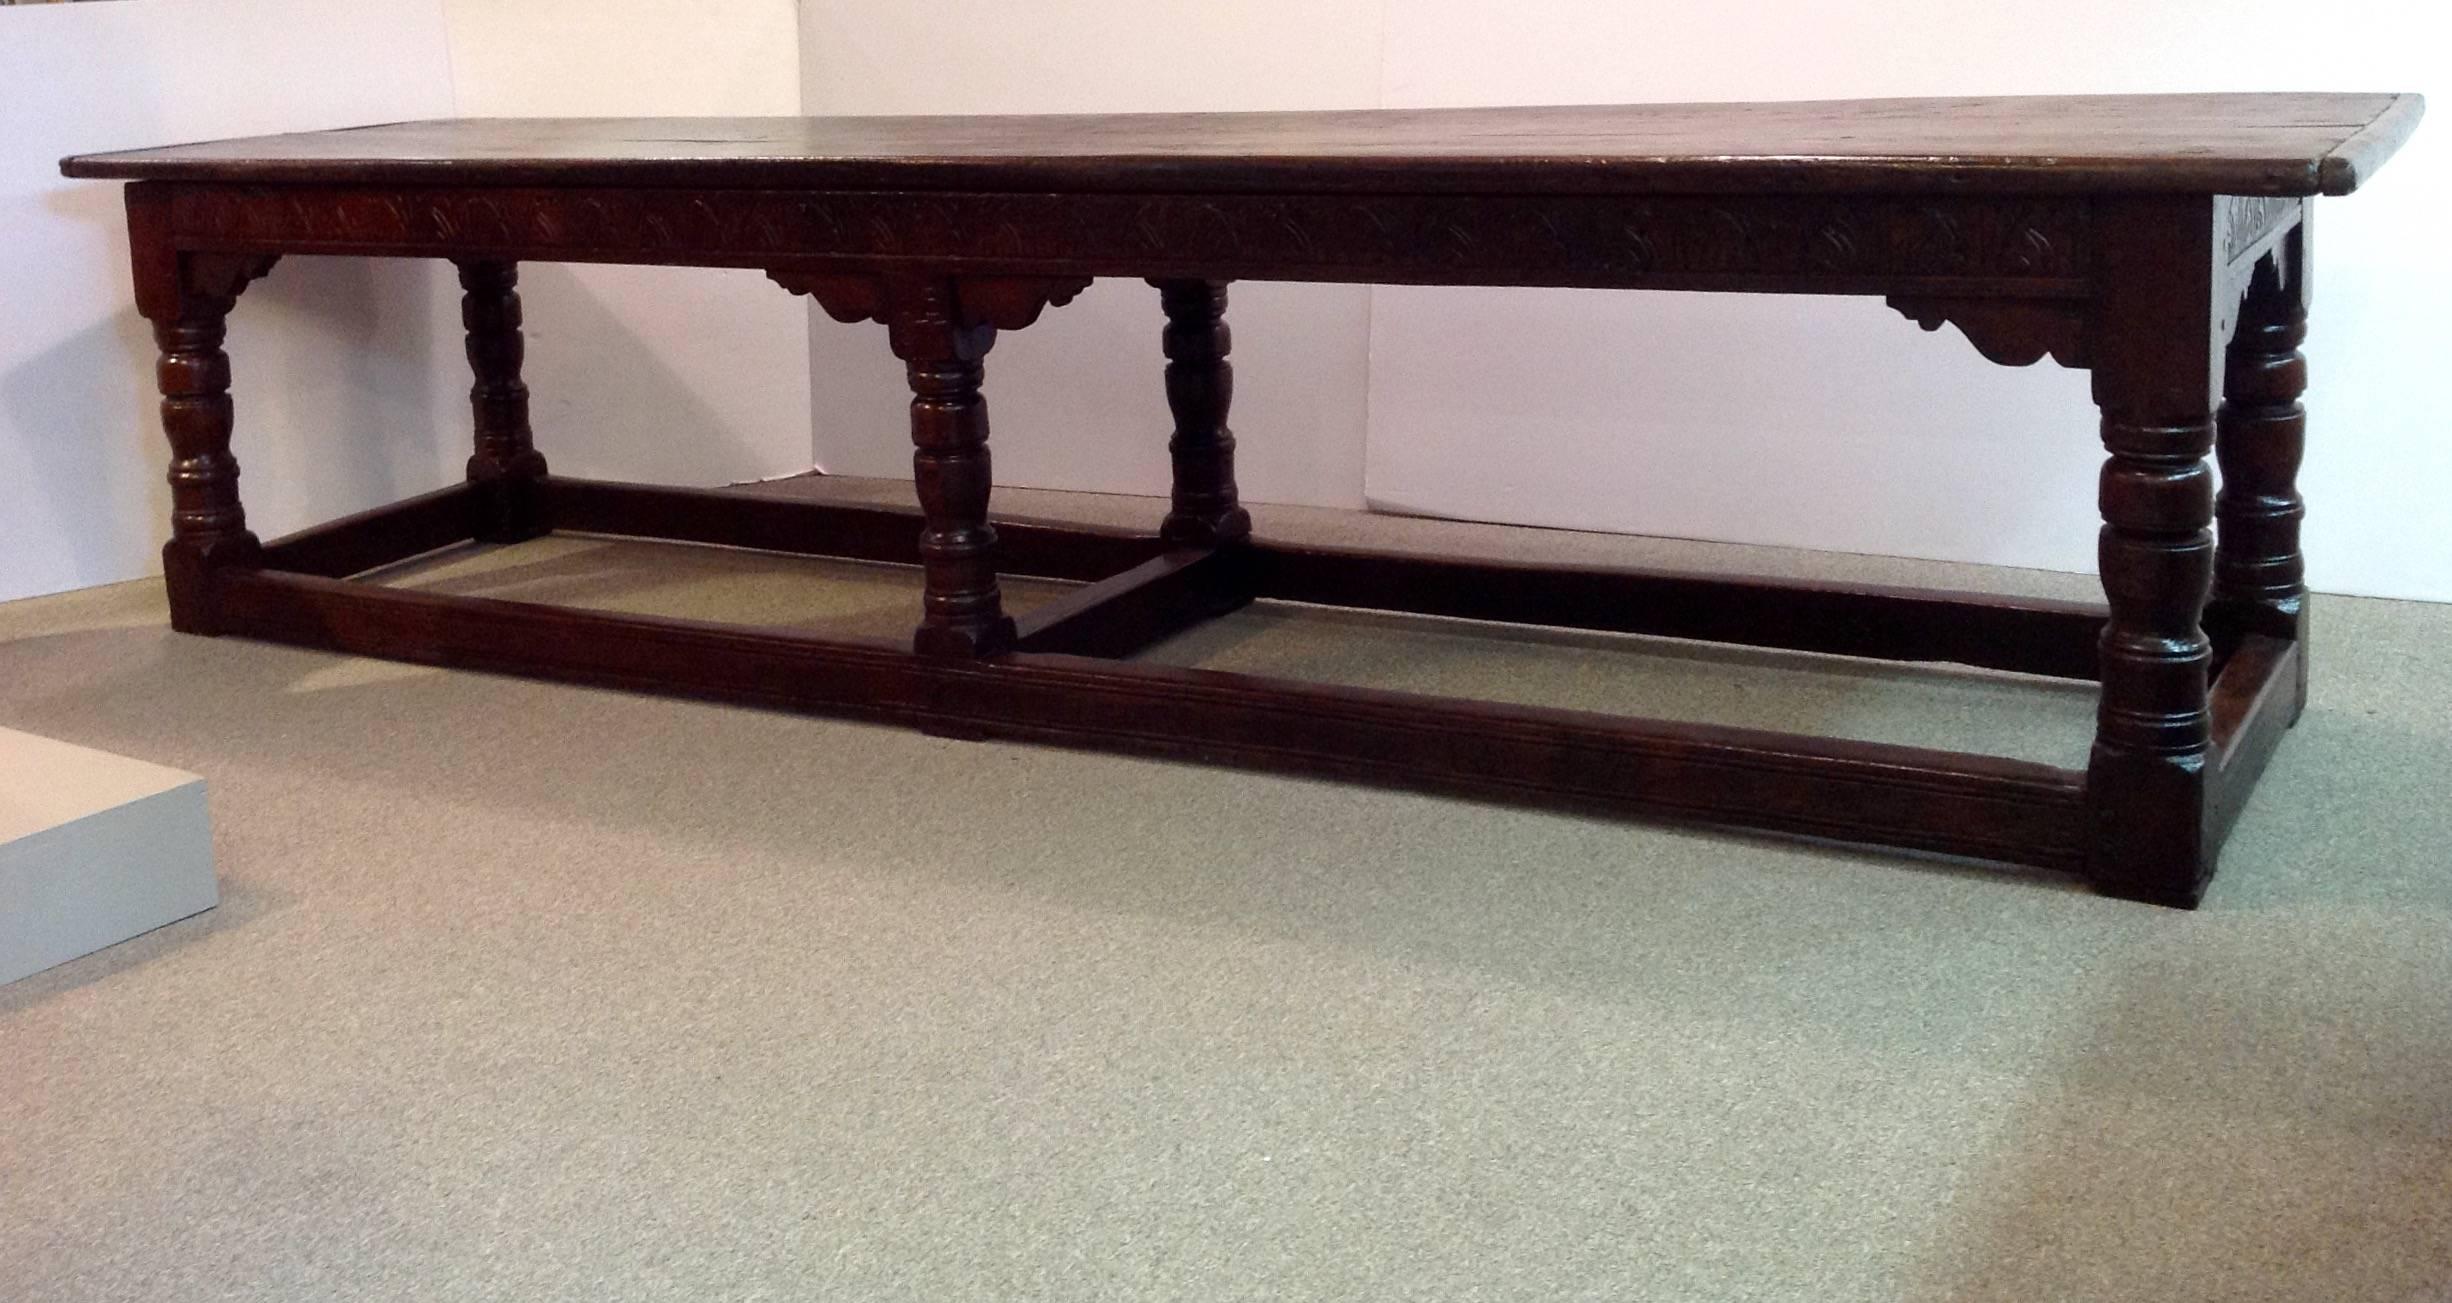 Antique long English oak serving or refectory table with a two board top on a stretcher base. The stretcher is carved on three sides with stylized tulips and the initials LB over 1677. It has an old patina. It dates from 17th century and later.